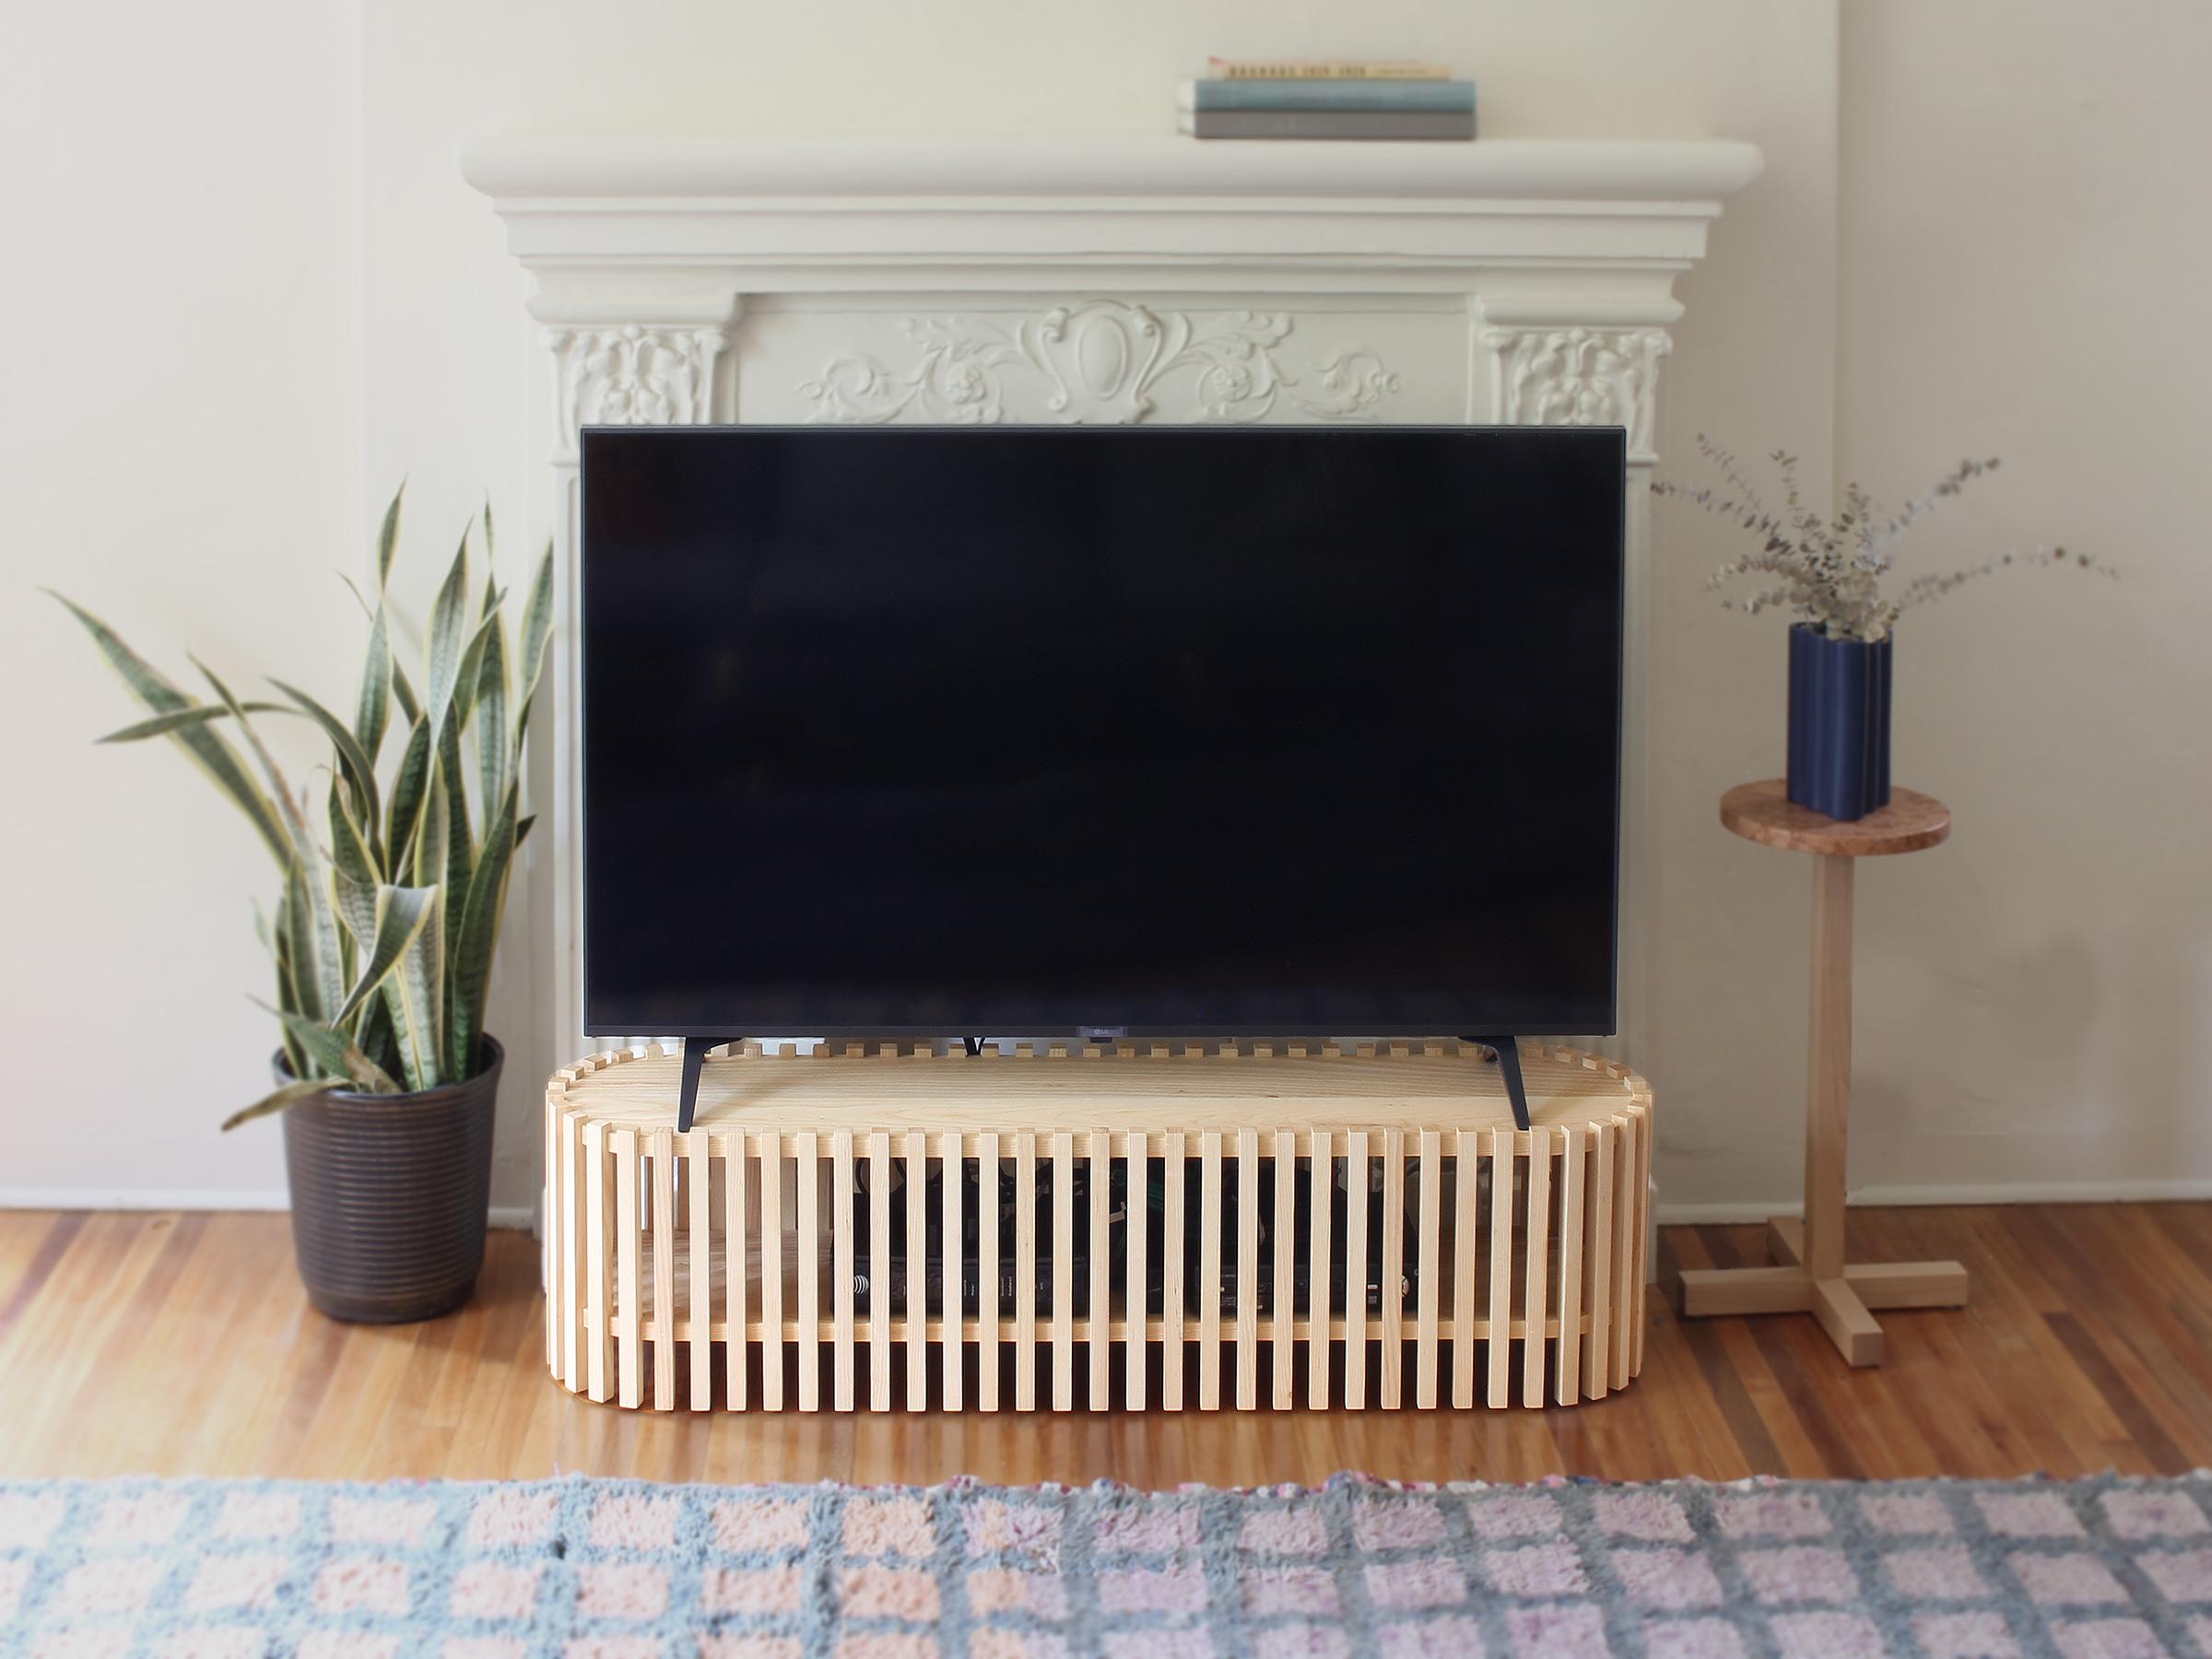 Light and airy yet robust with functionality, this television stand not only places your TV at an optimal viewing height but also houses the necessary equipment such as wifi router, apple tv, cable box etcetera. The basket like enclosure hides the